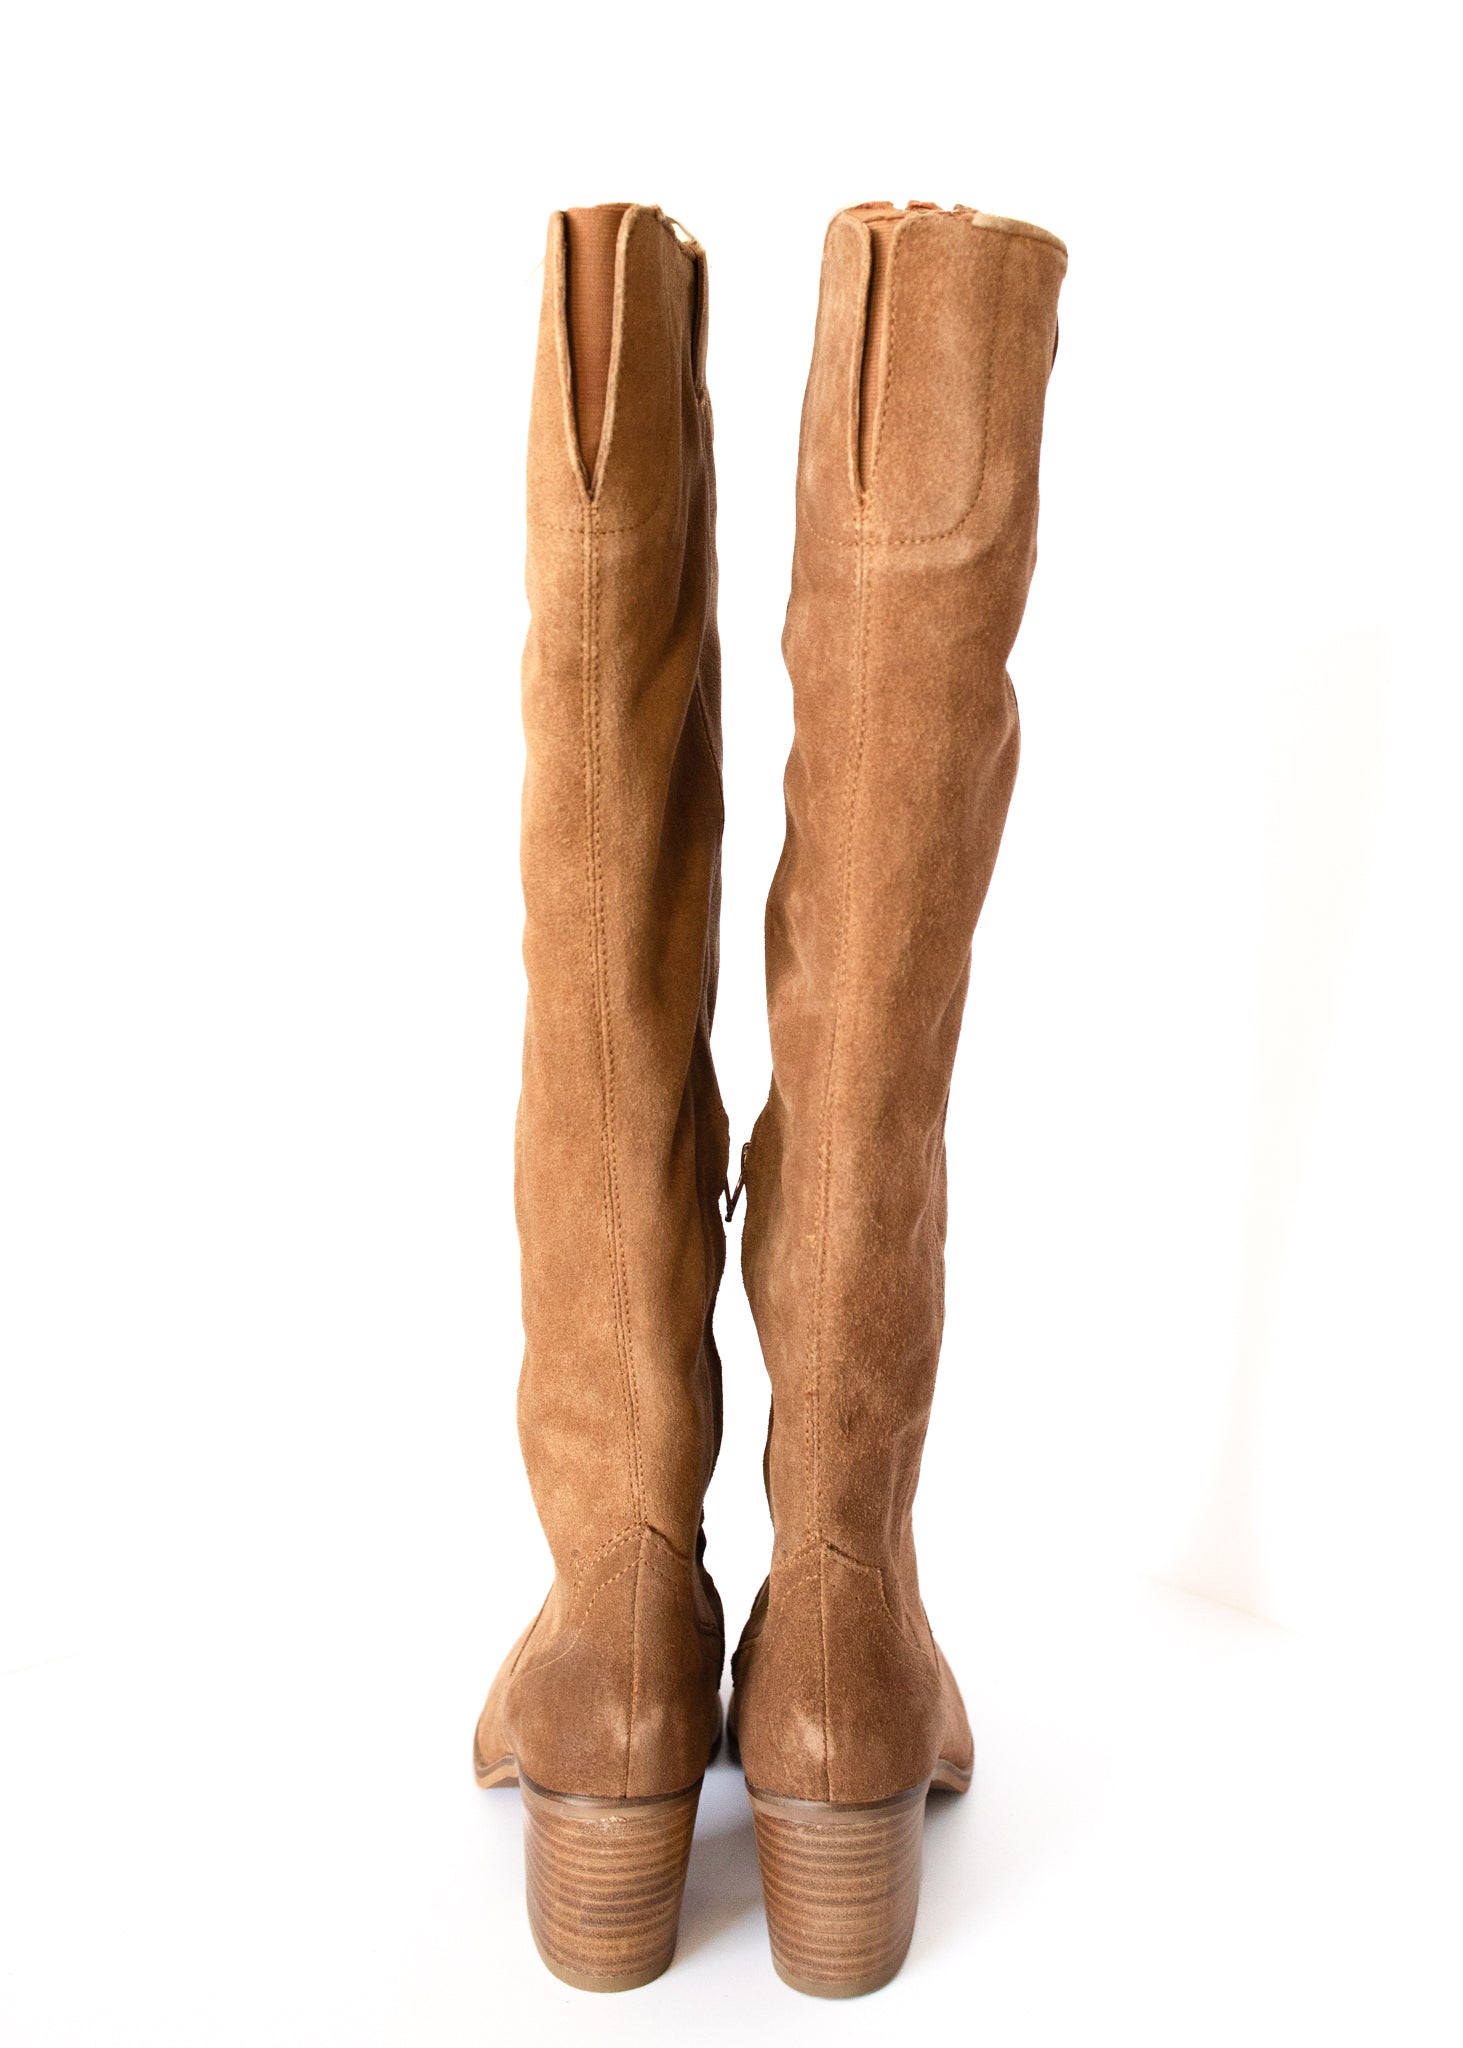 Izzy Suede Tall Boot in Tan